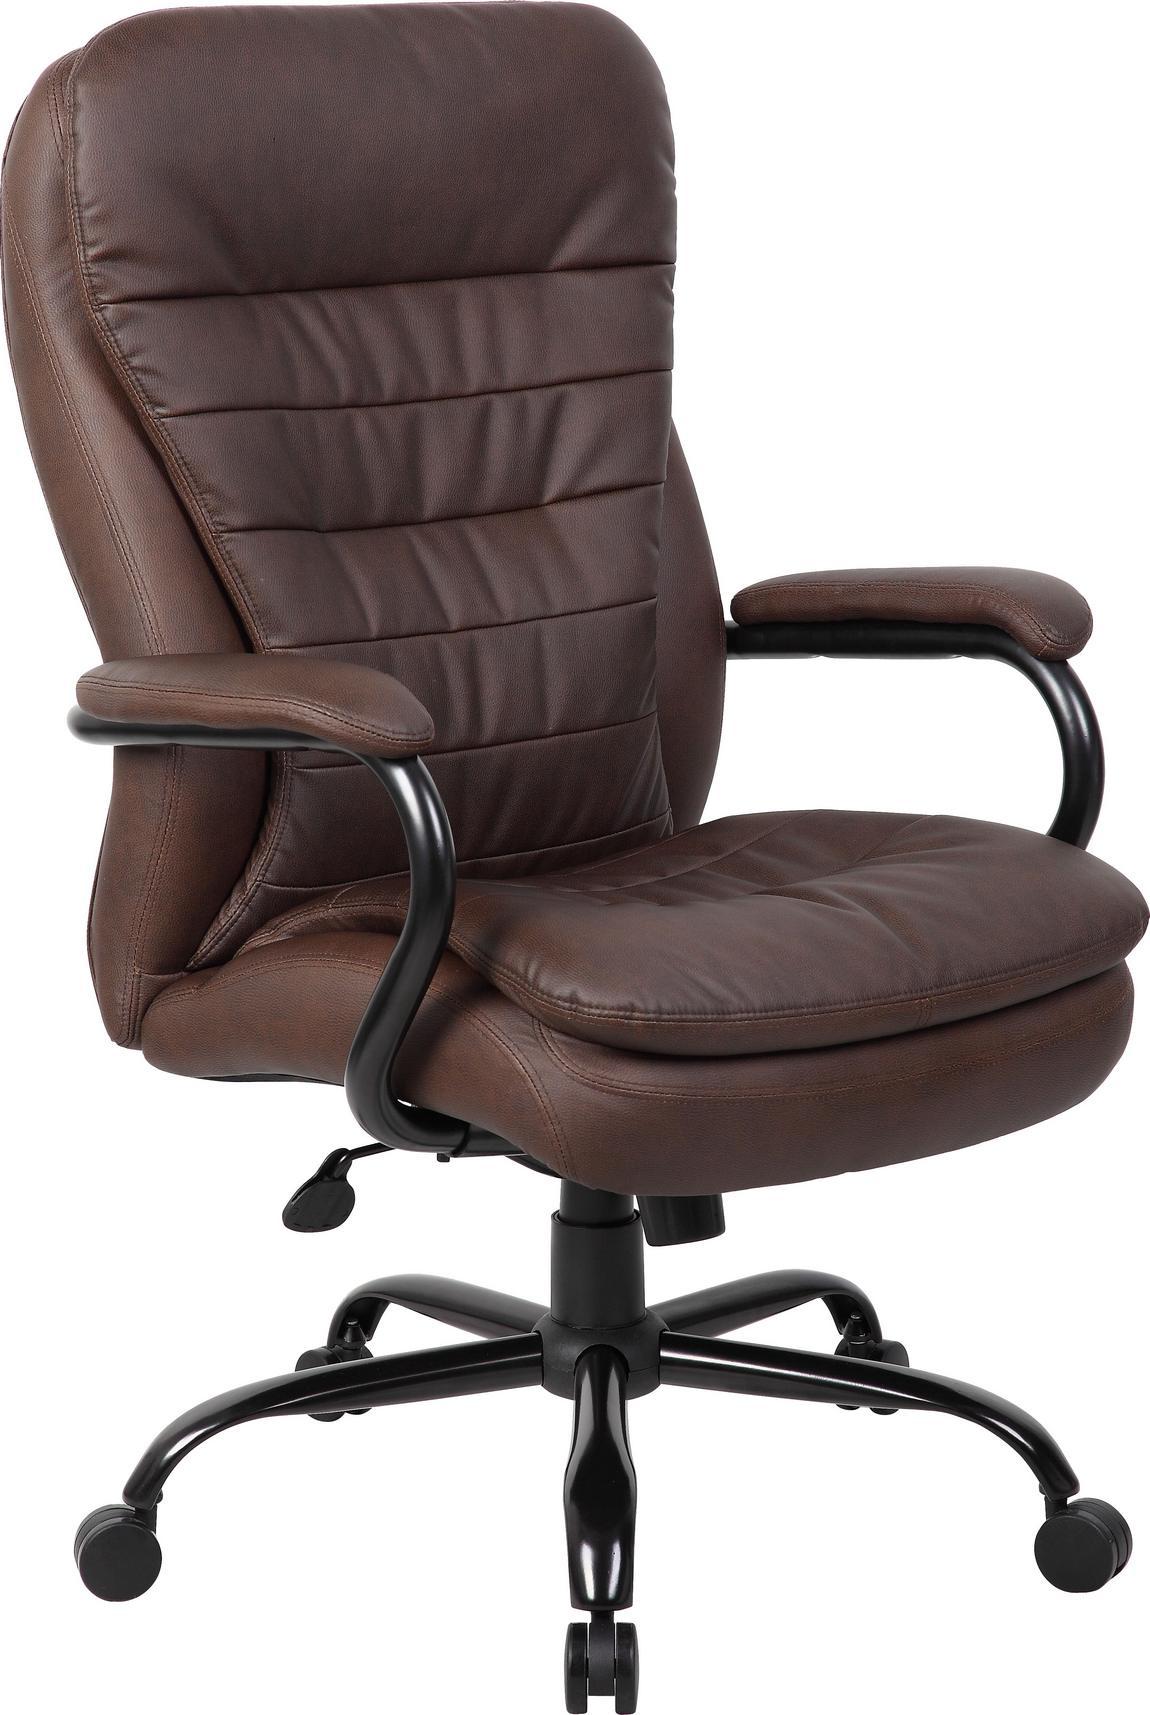 Heavy Weight Office Chair with Brown Upholstery | Madison Liquidators